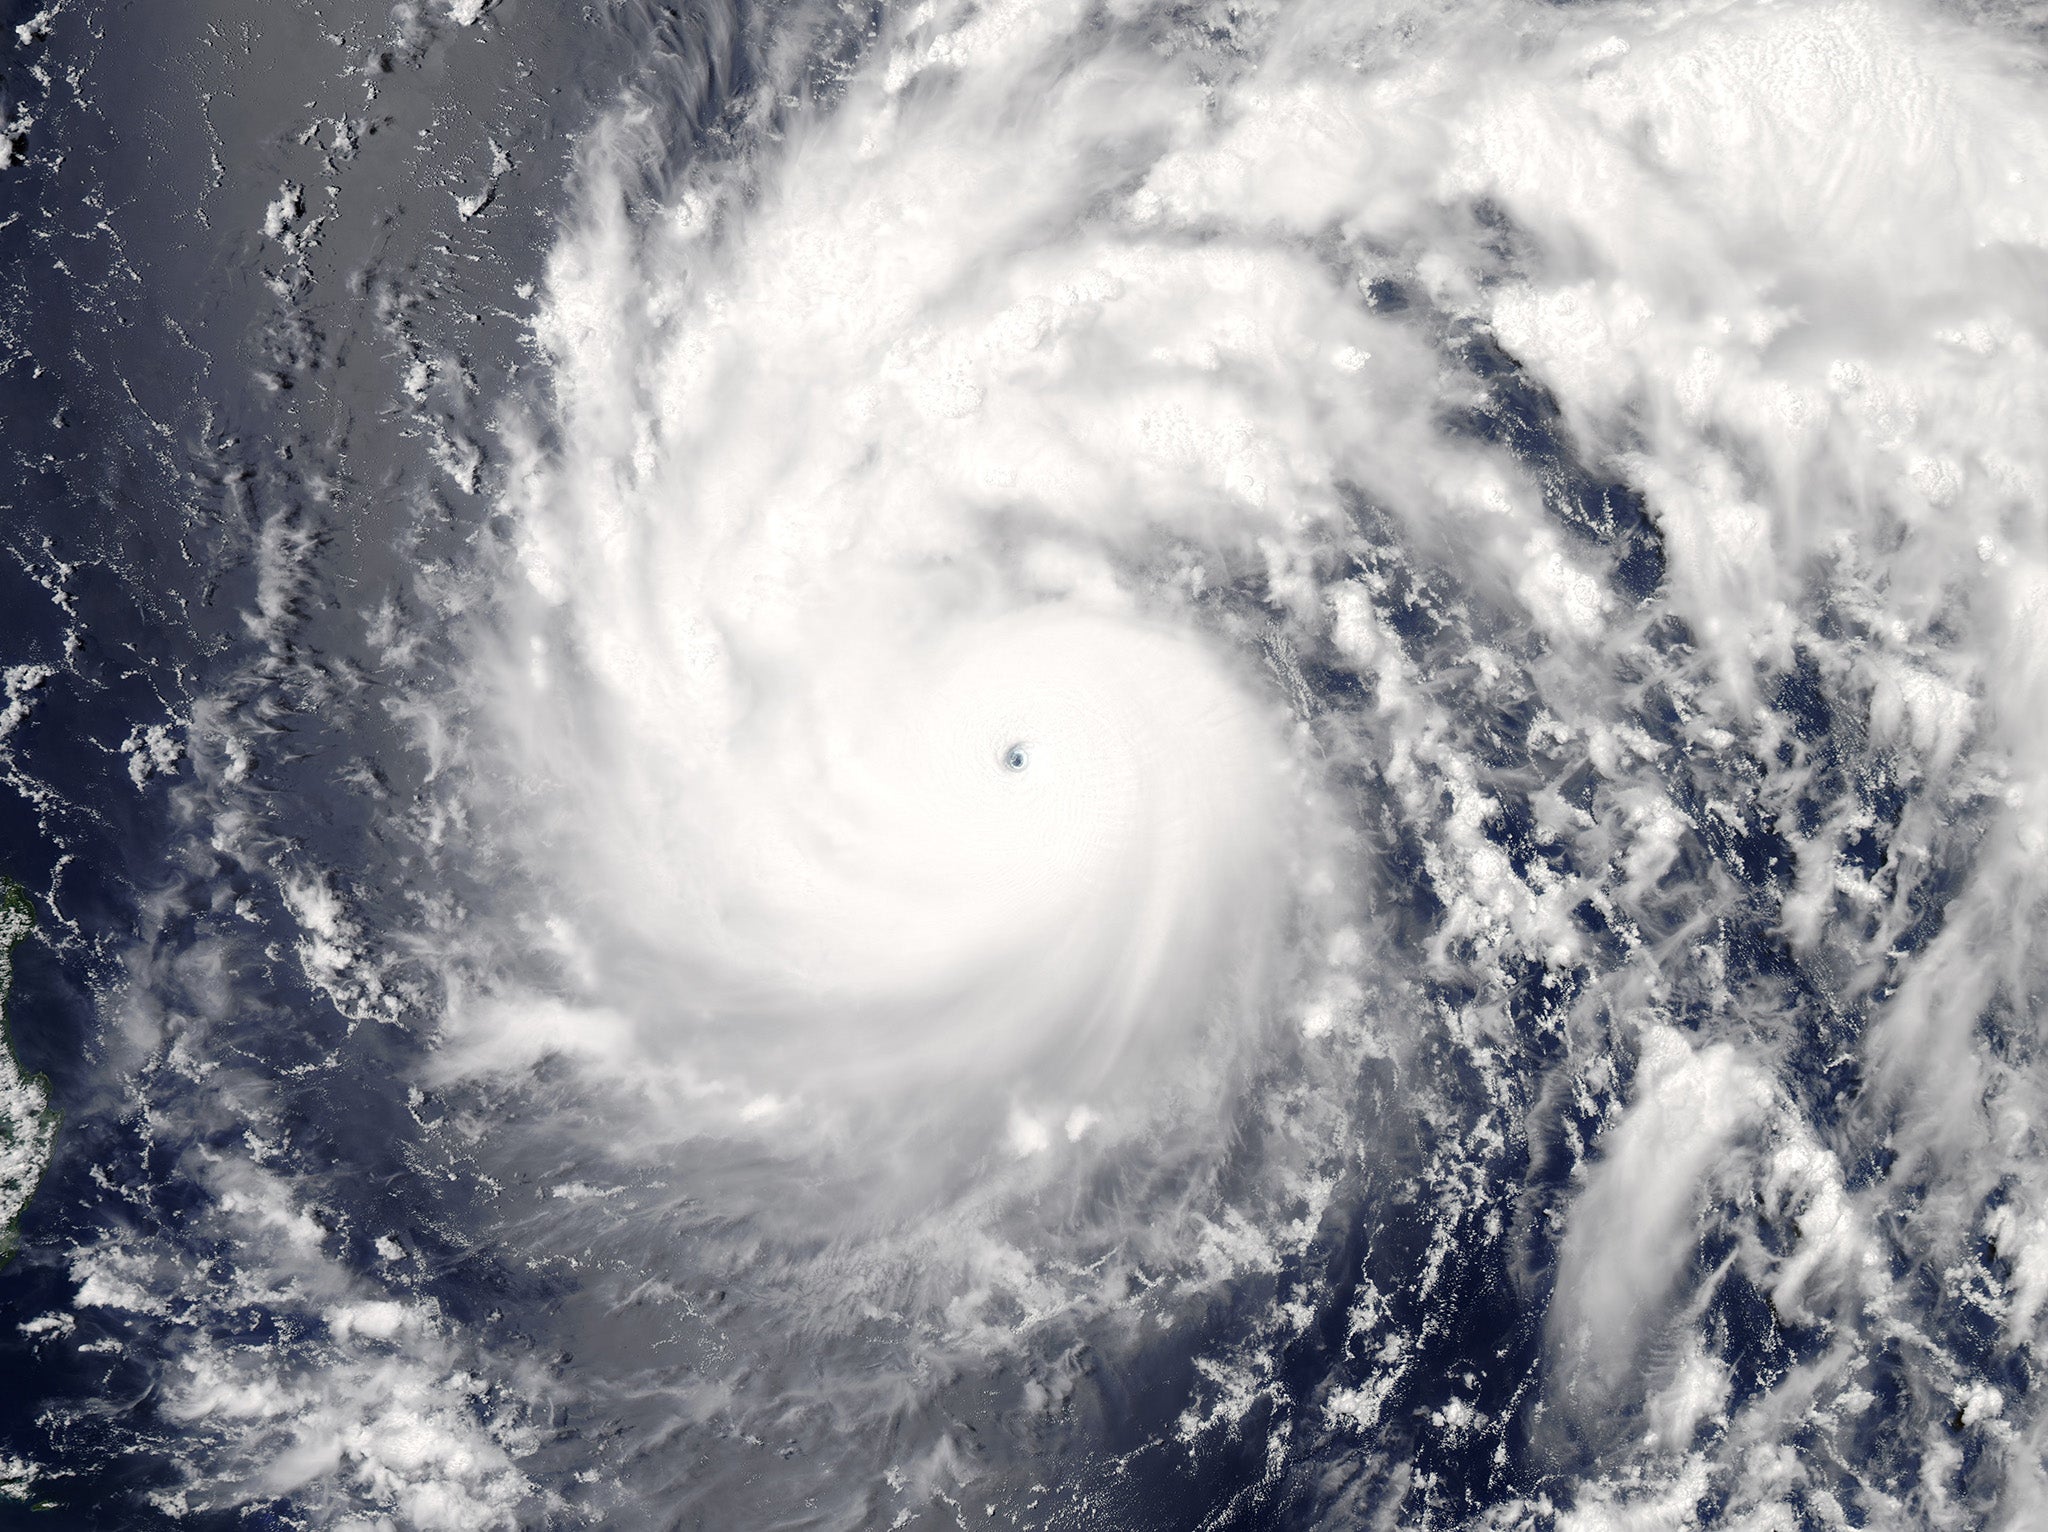 NASA sateillite image shows Typhoon Nepartak as it approaches Taiwan and the Philippines